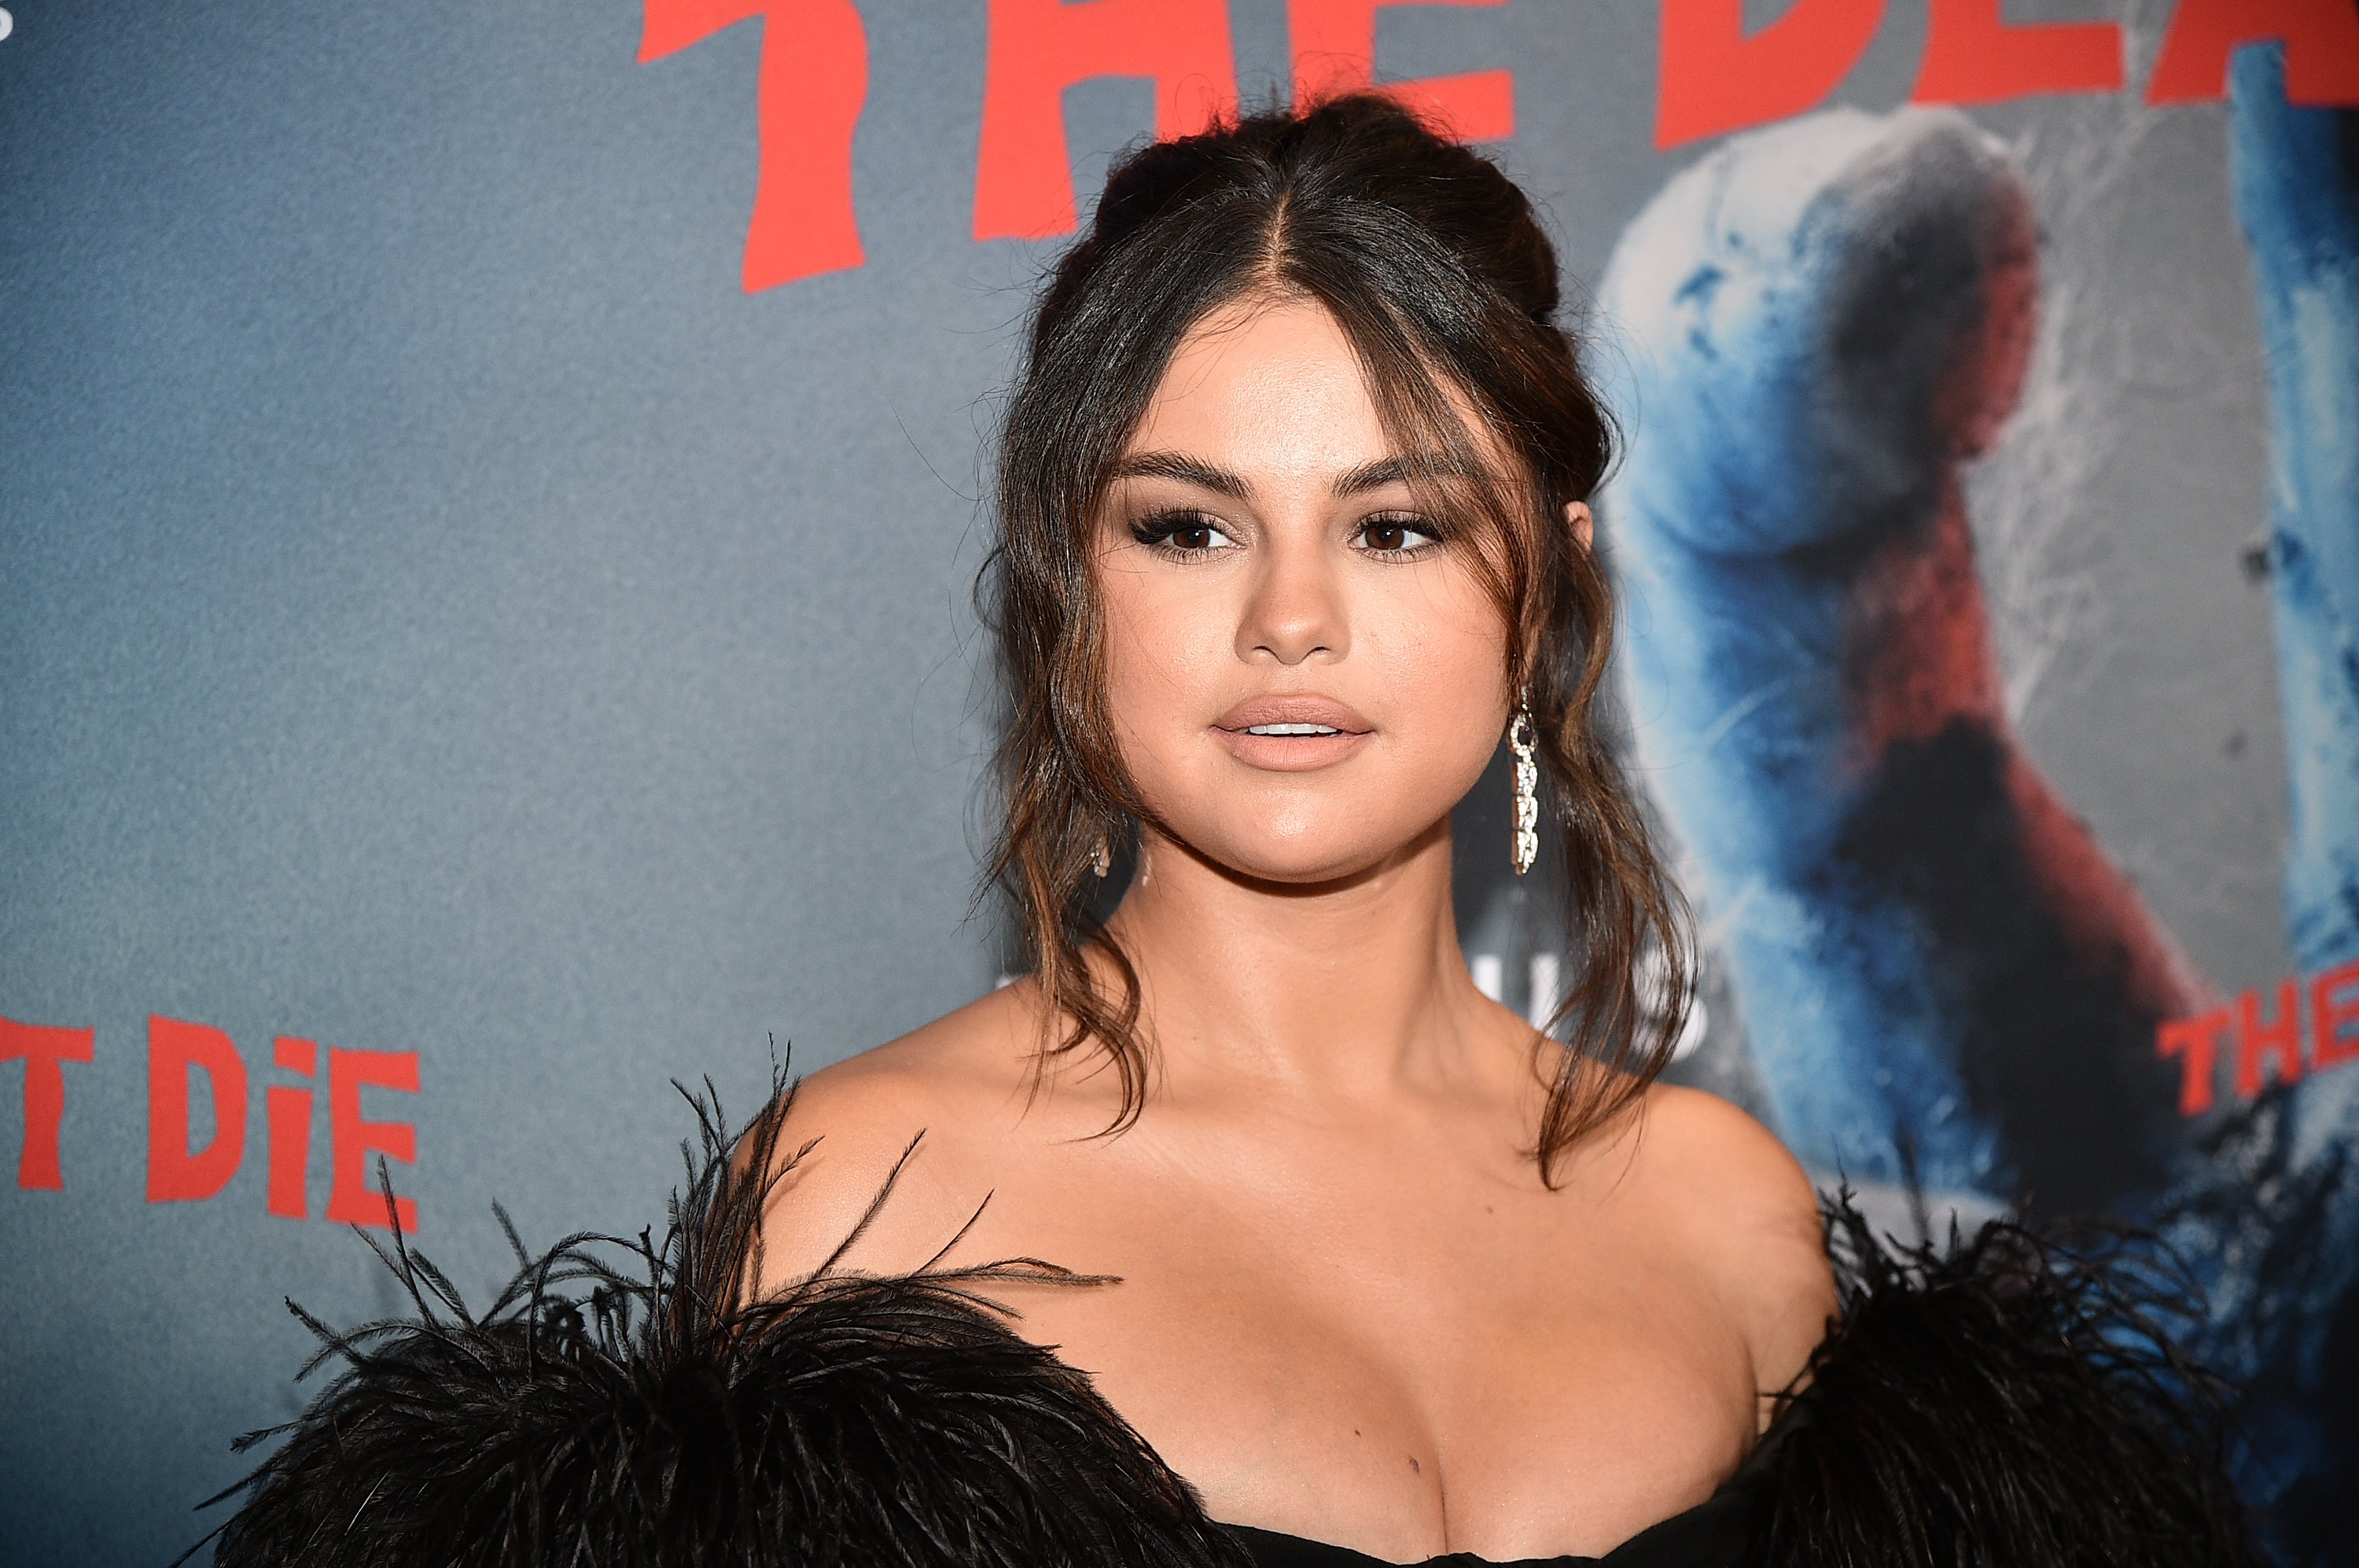 Selena Gomez attends "The Dead Don't Die" New York Premiere at Museum of Modern Art on June 10, 2019 in New York City. (Photo by Theo Wargo/Getty Images)